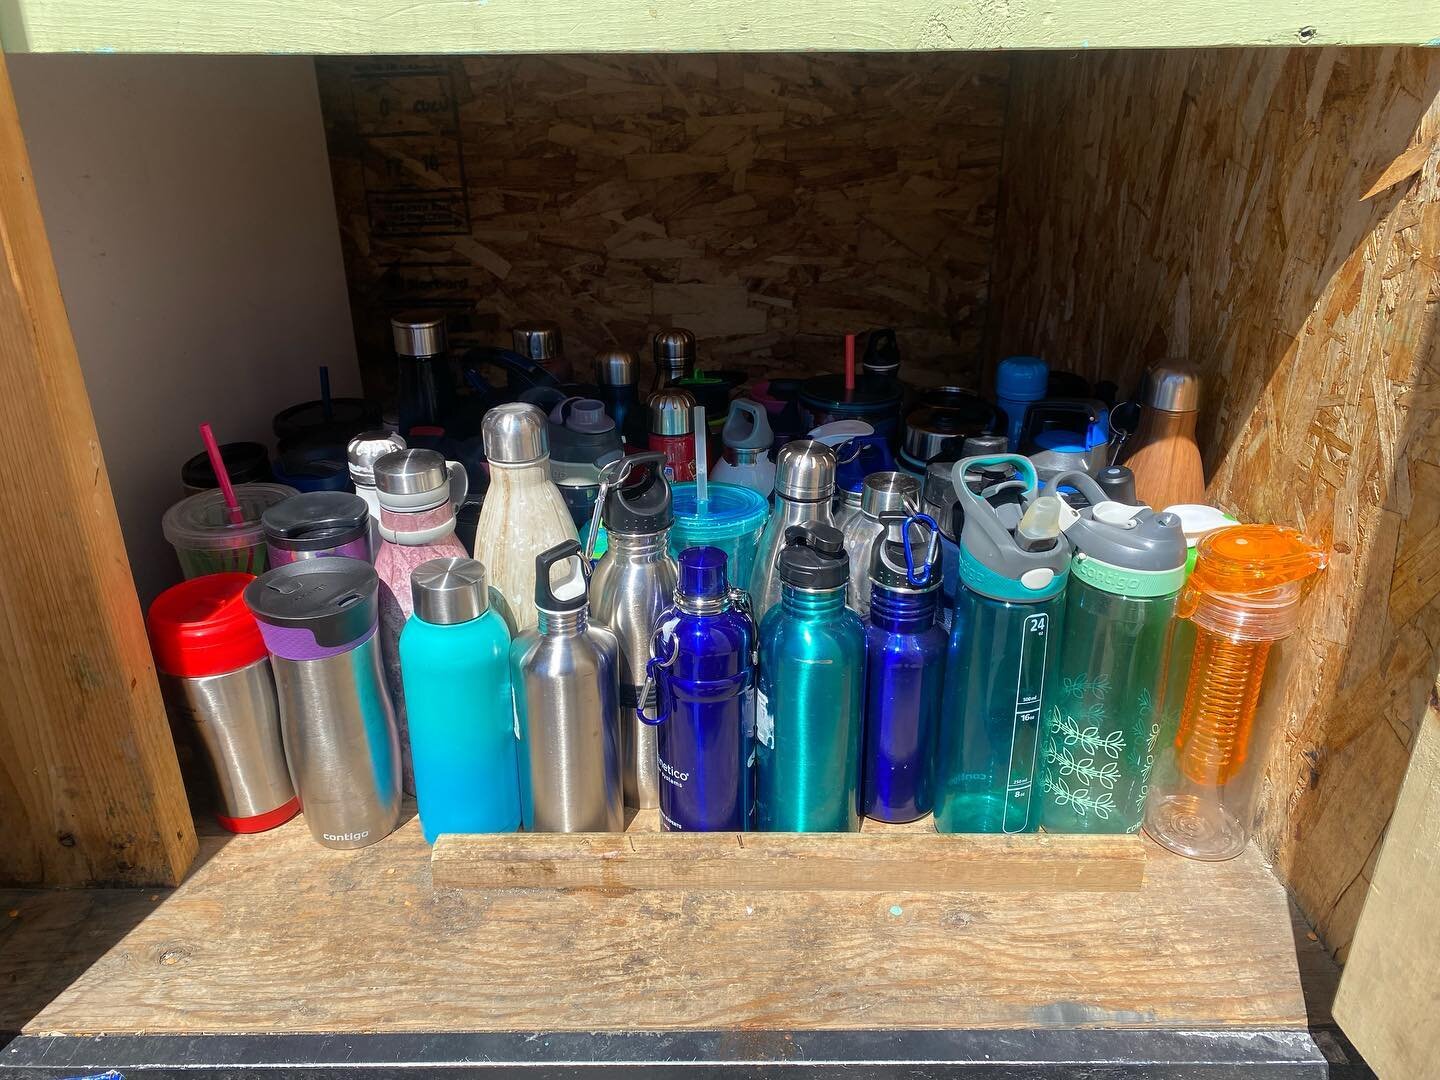 We never tire of saying it: this community rocks! 64 water bottles were placed in the fridge today, and that is just after 2 days of our water bottle drive! Thanks to all who donated and all who plan on donating. We will be accepting water bottles fo